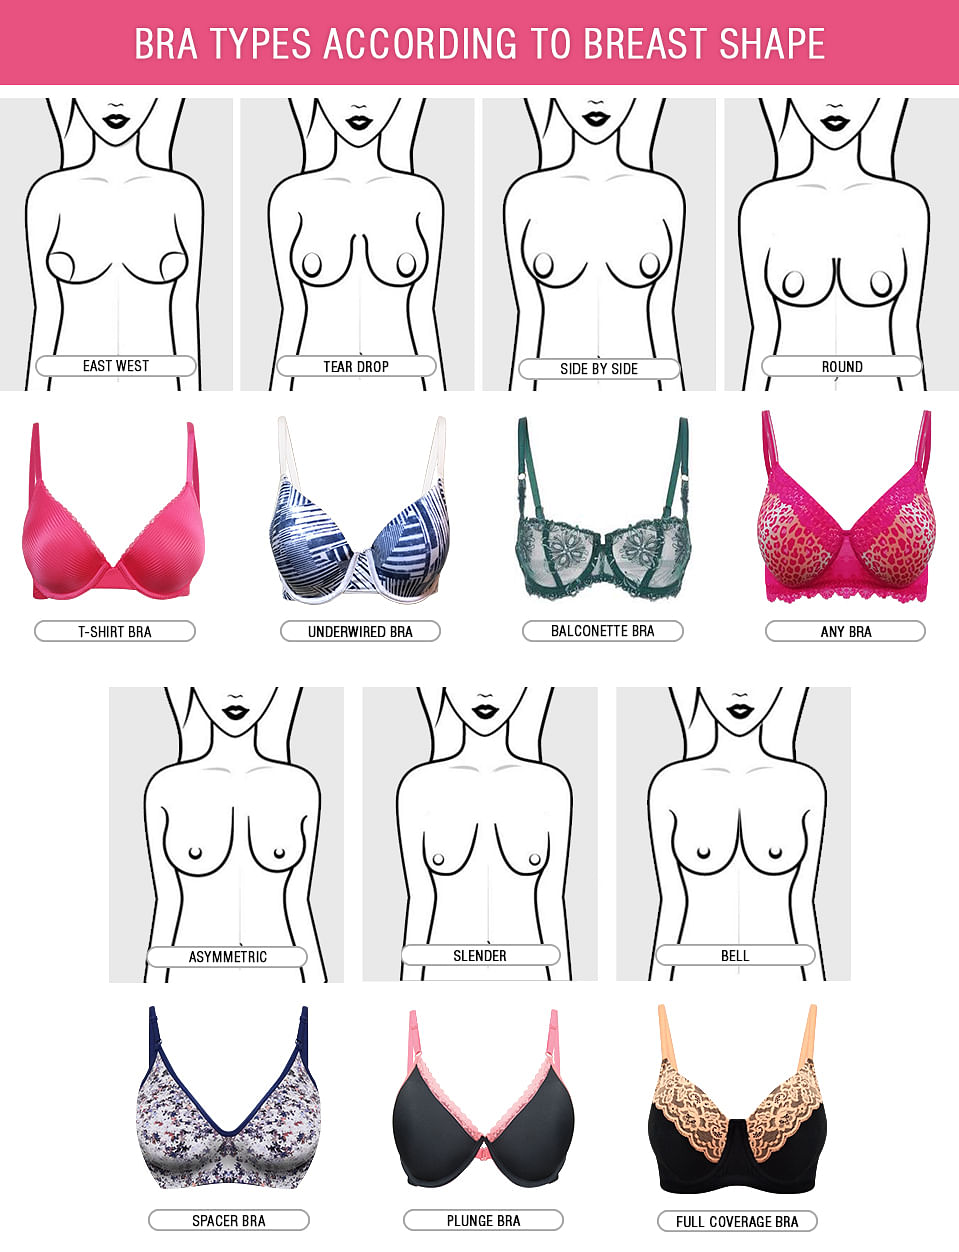 5 Tips for Choosing the Perfect Bra